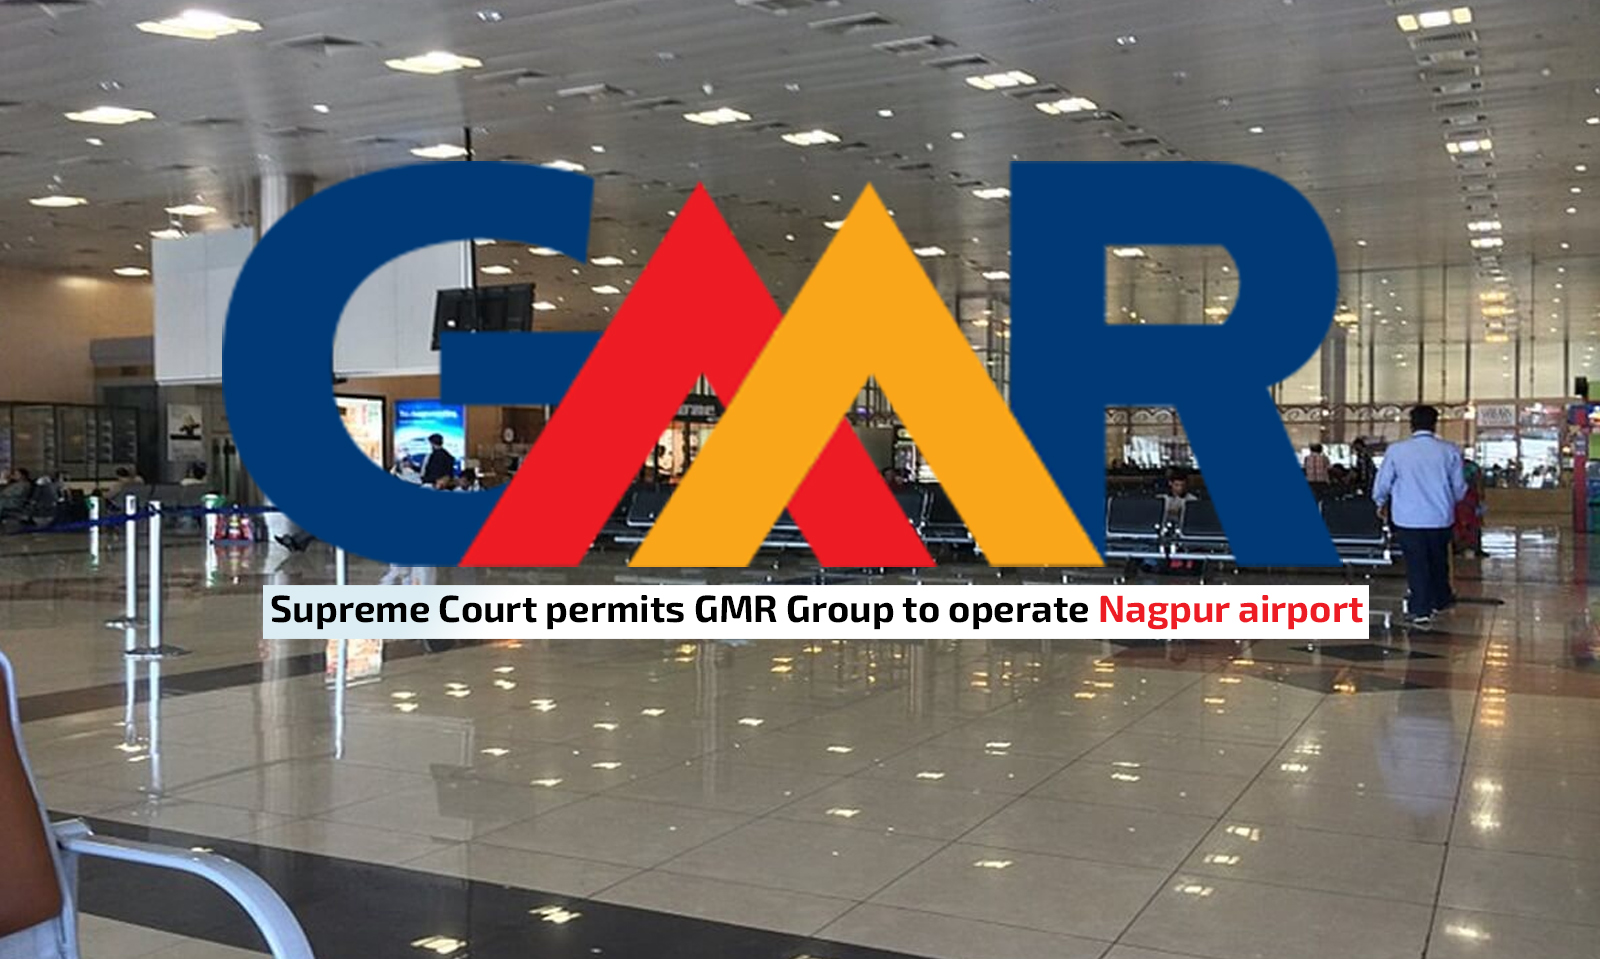 Supreme Court permits GMR Group to operate Nagpur airport